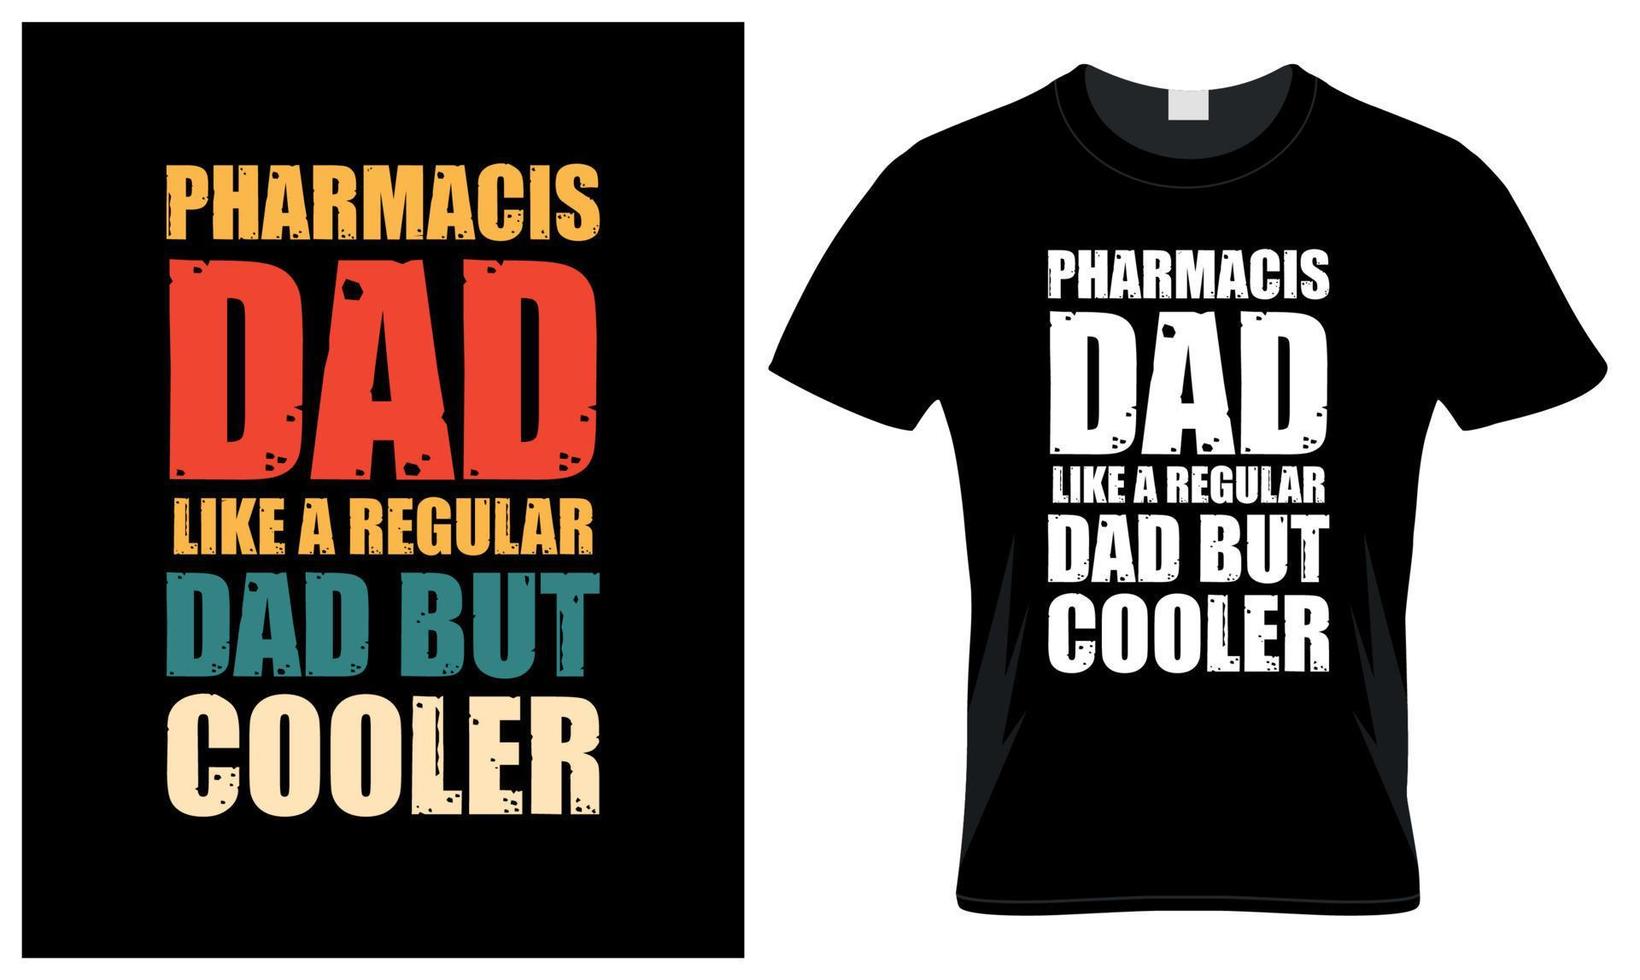 Pharmacis dad lover father's day vintage t-shirt design vector